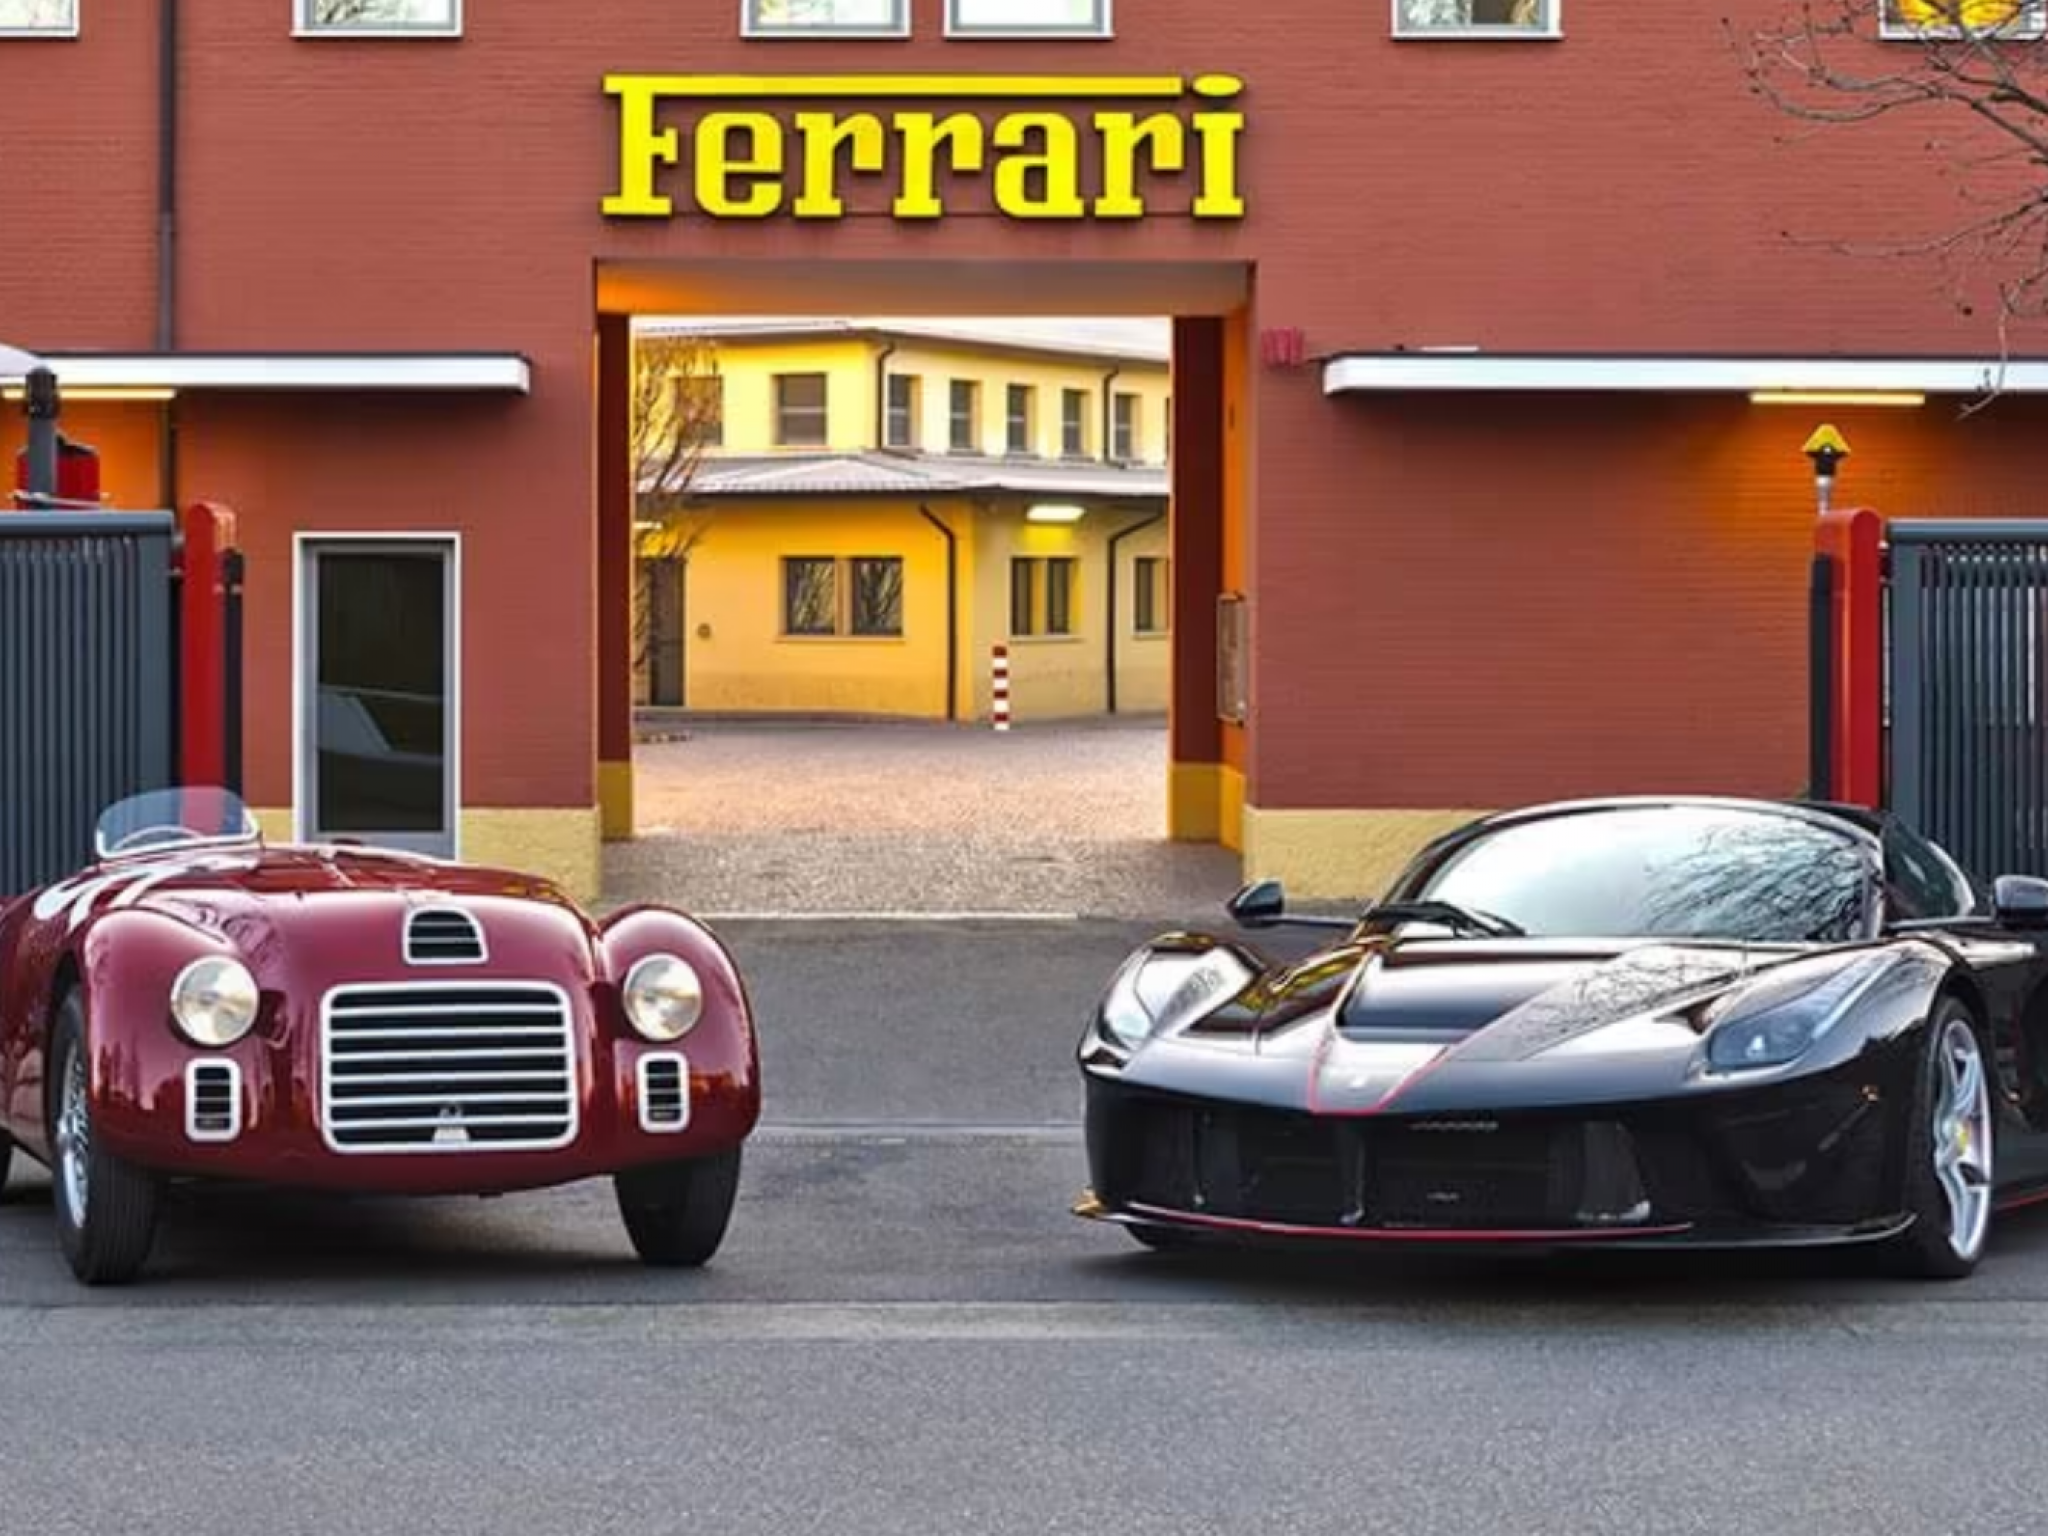  ferrari-asbury-automotive-and-autonation-touted-as-top-picks-for-2024-by-bofa-luxury-status-and-strong-free-cash-flow-drive-growth 